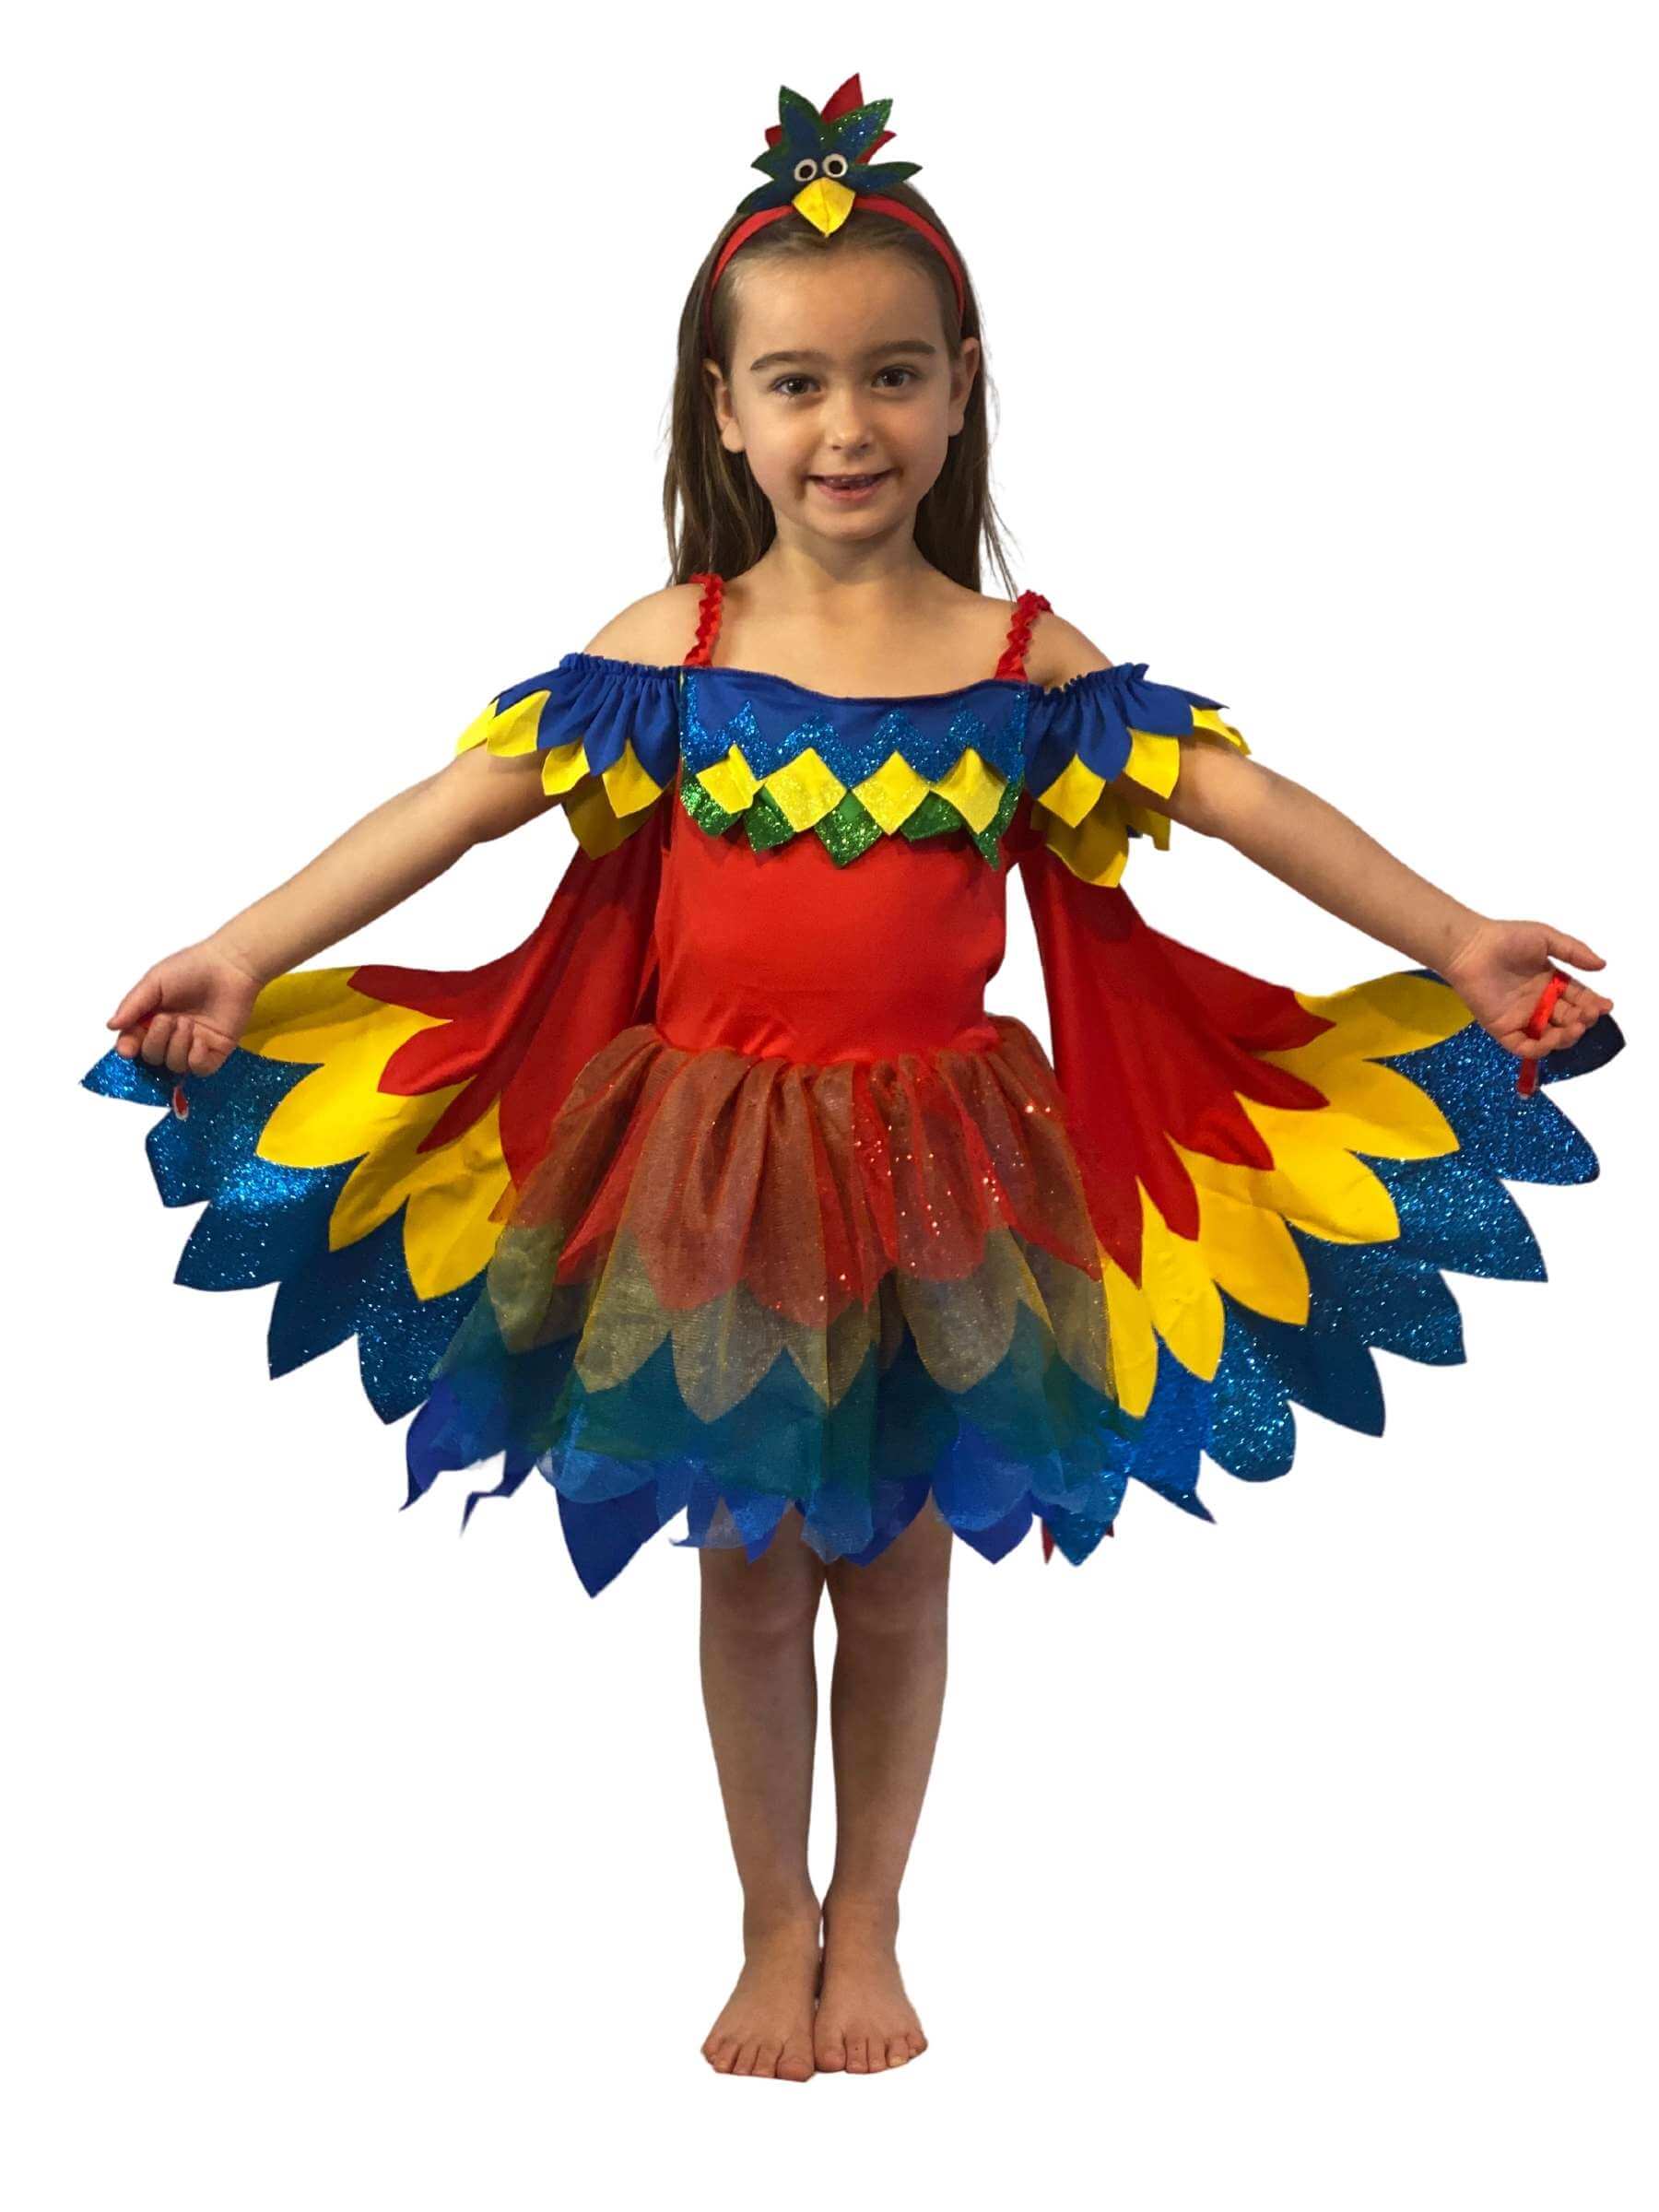 Girl wearing red, yellow and blue macaw parrot costume, showing the parrot headband.